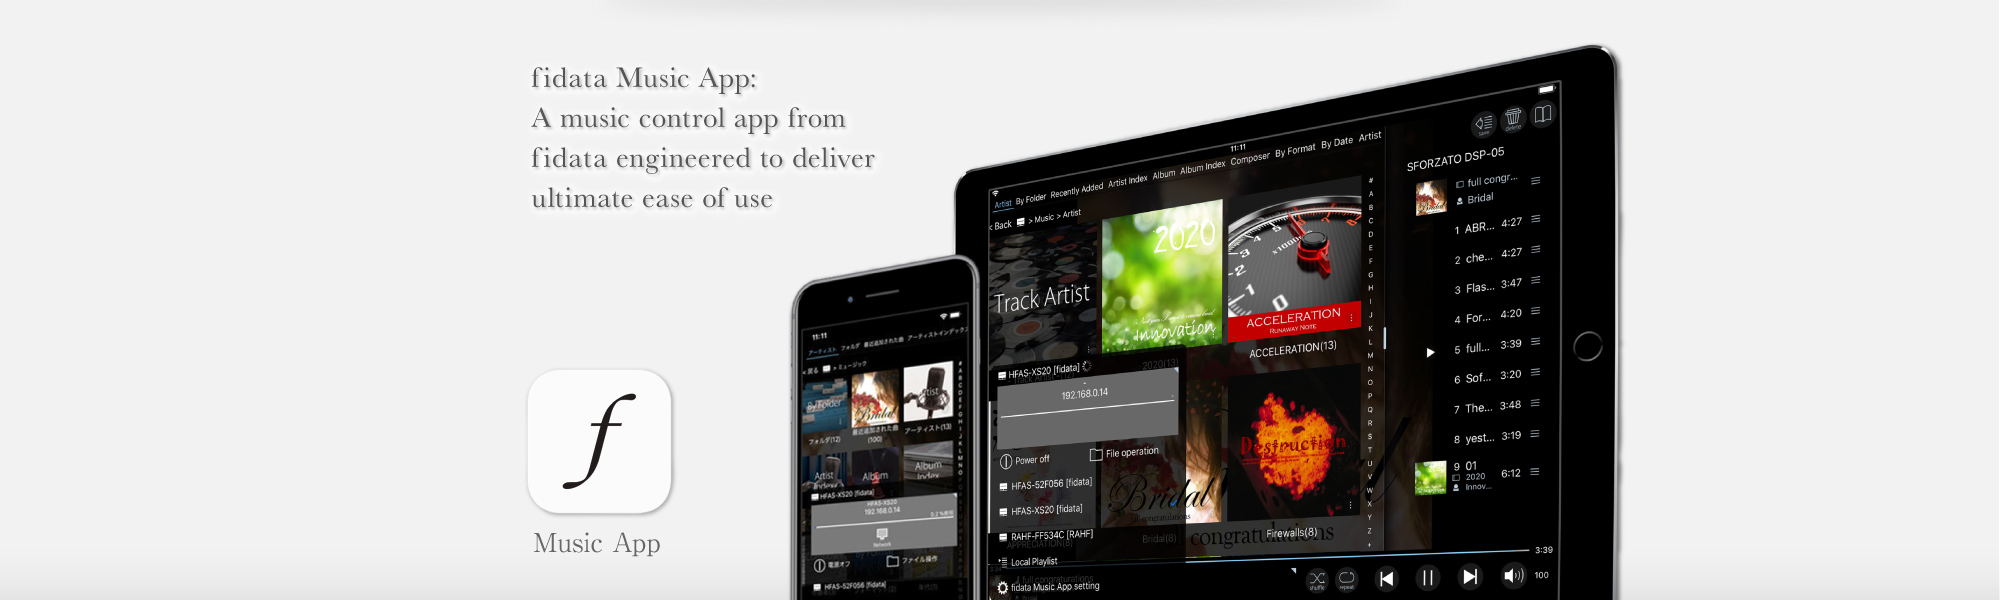 ﬁdata Music App: A music control app from ﬁdata engineered to deliver ultimate ease of use